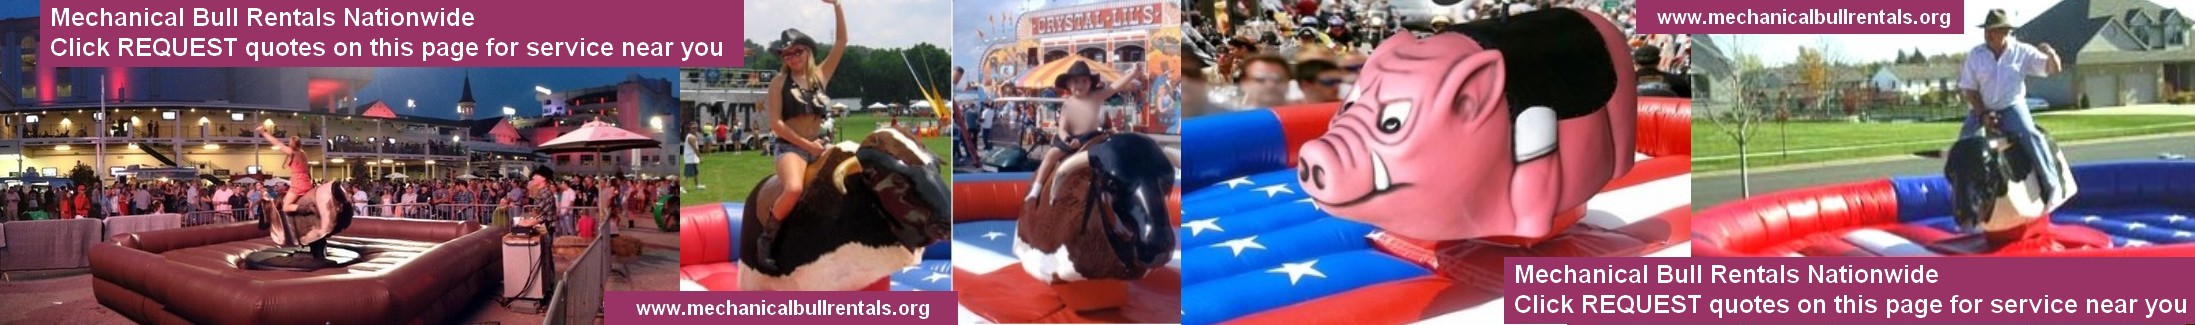 Mechanical Bull Rentals Portland Oregon OR and near you. Free referrals to local mechanical bull companies LOGO